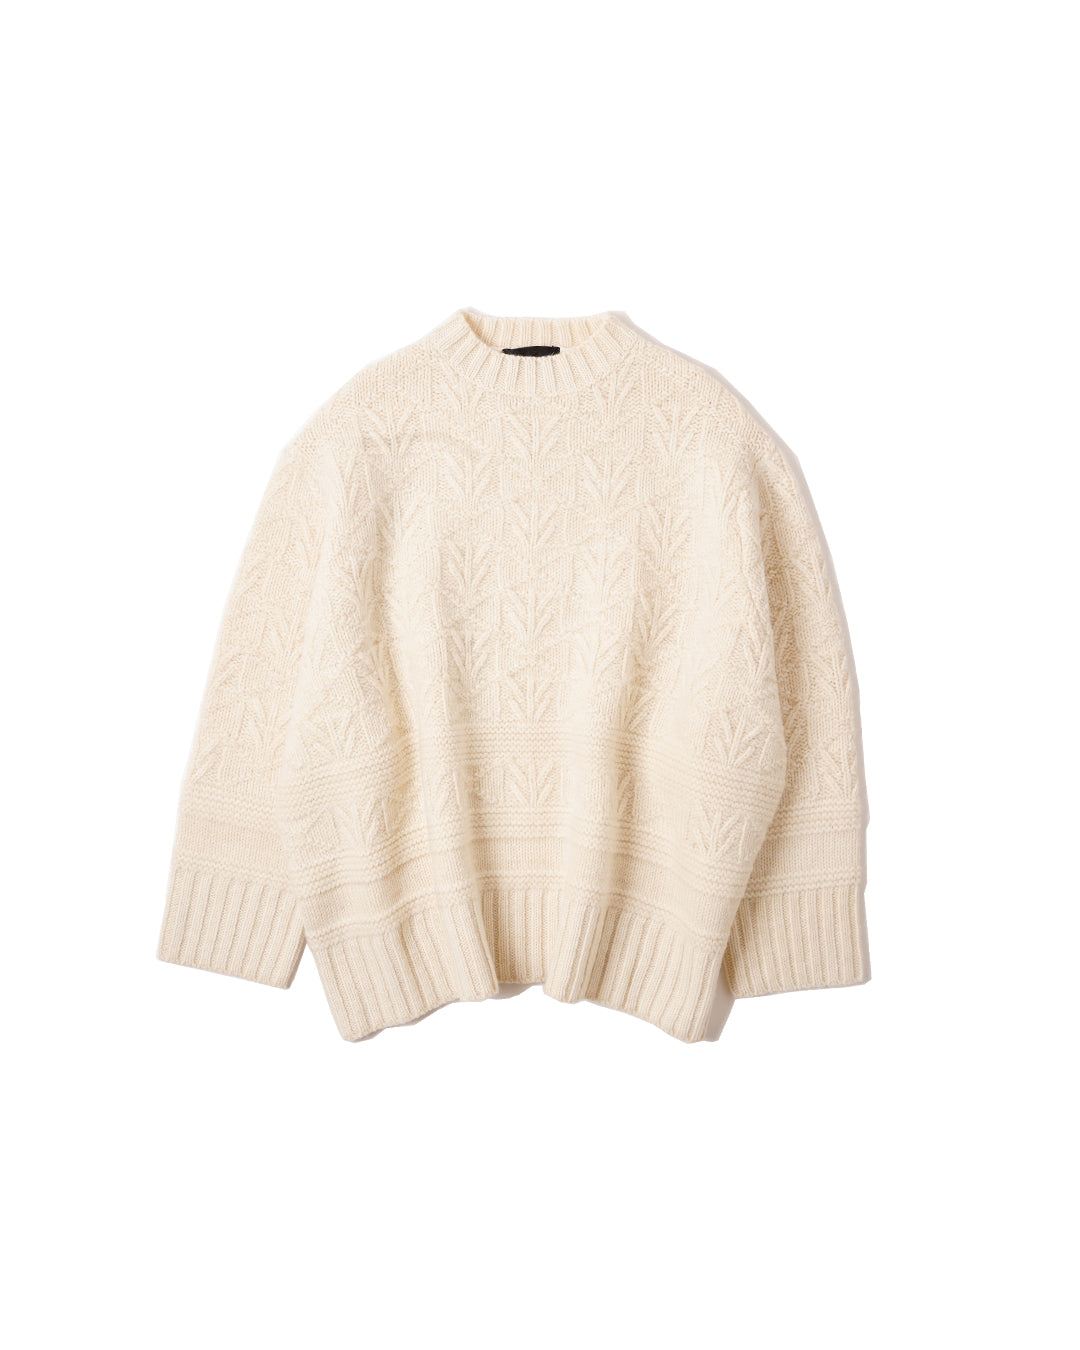 Hunting Oversized Knit (WHT) *LAST - Baby's all right